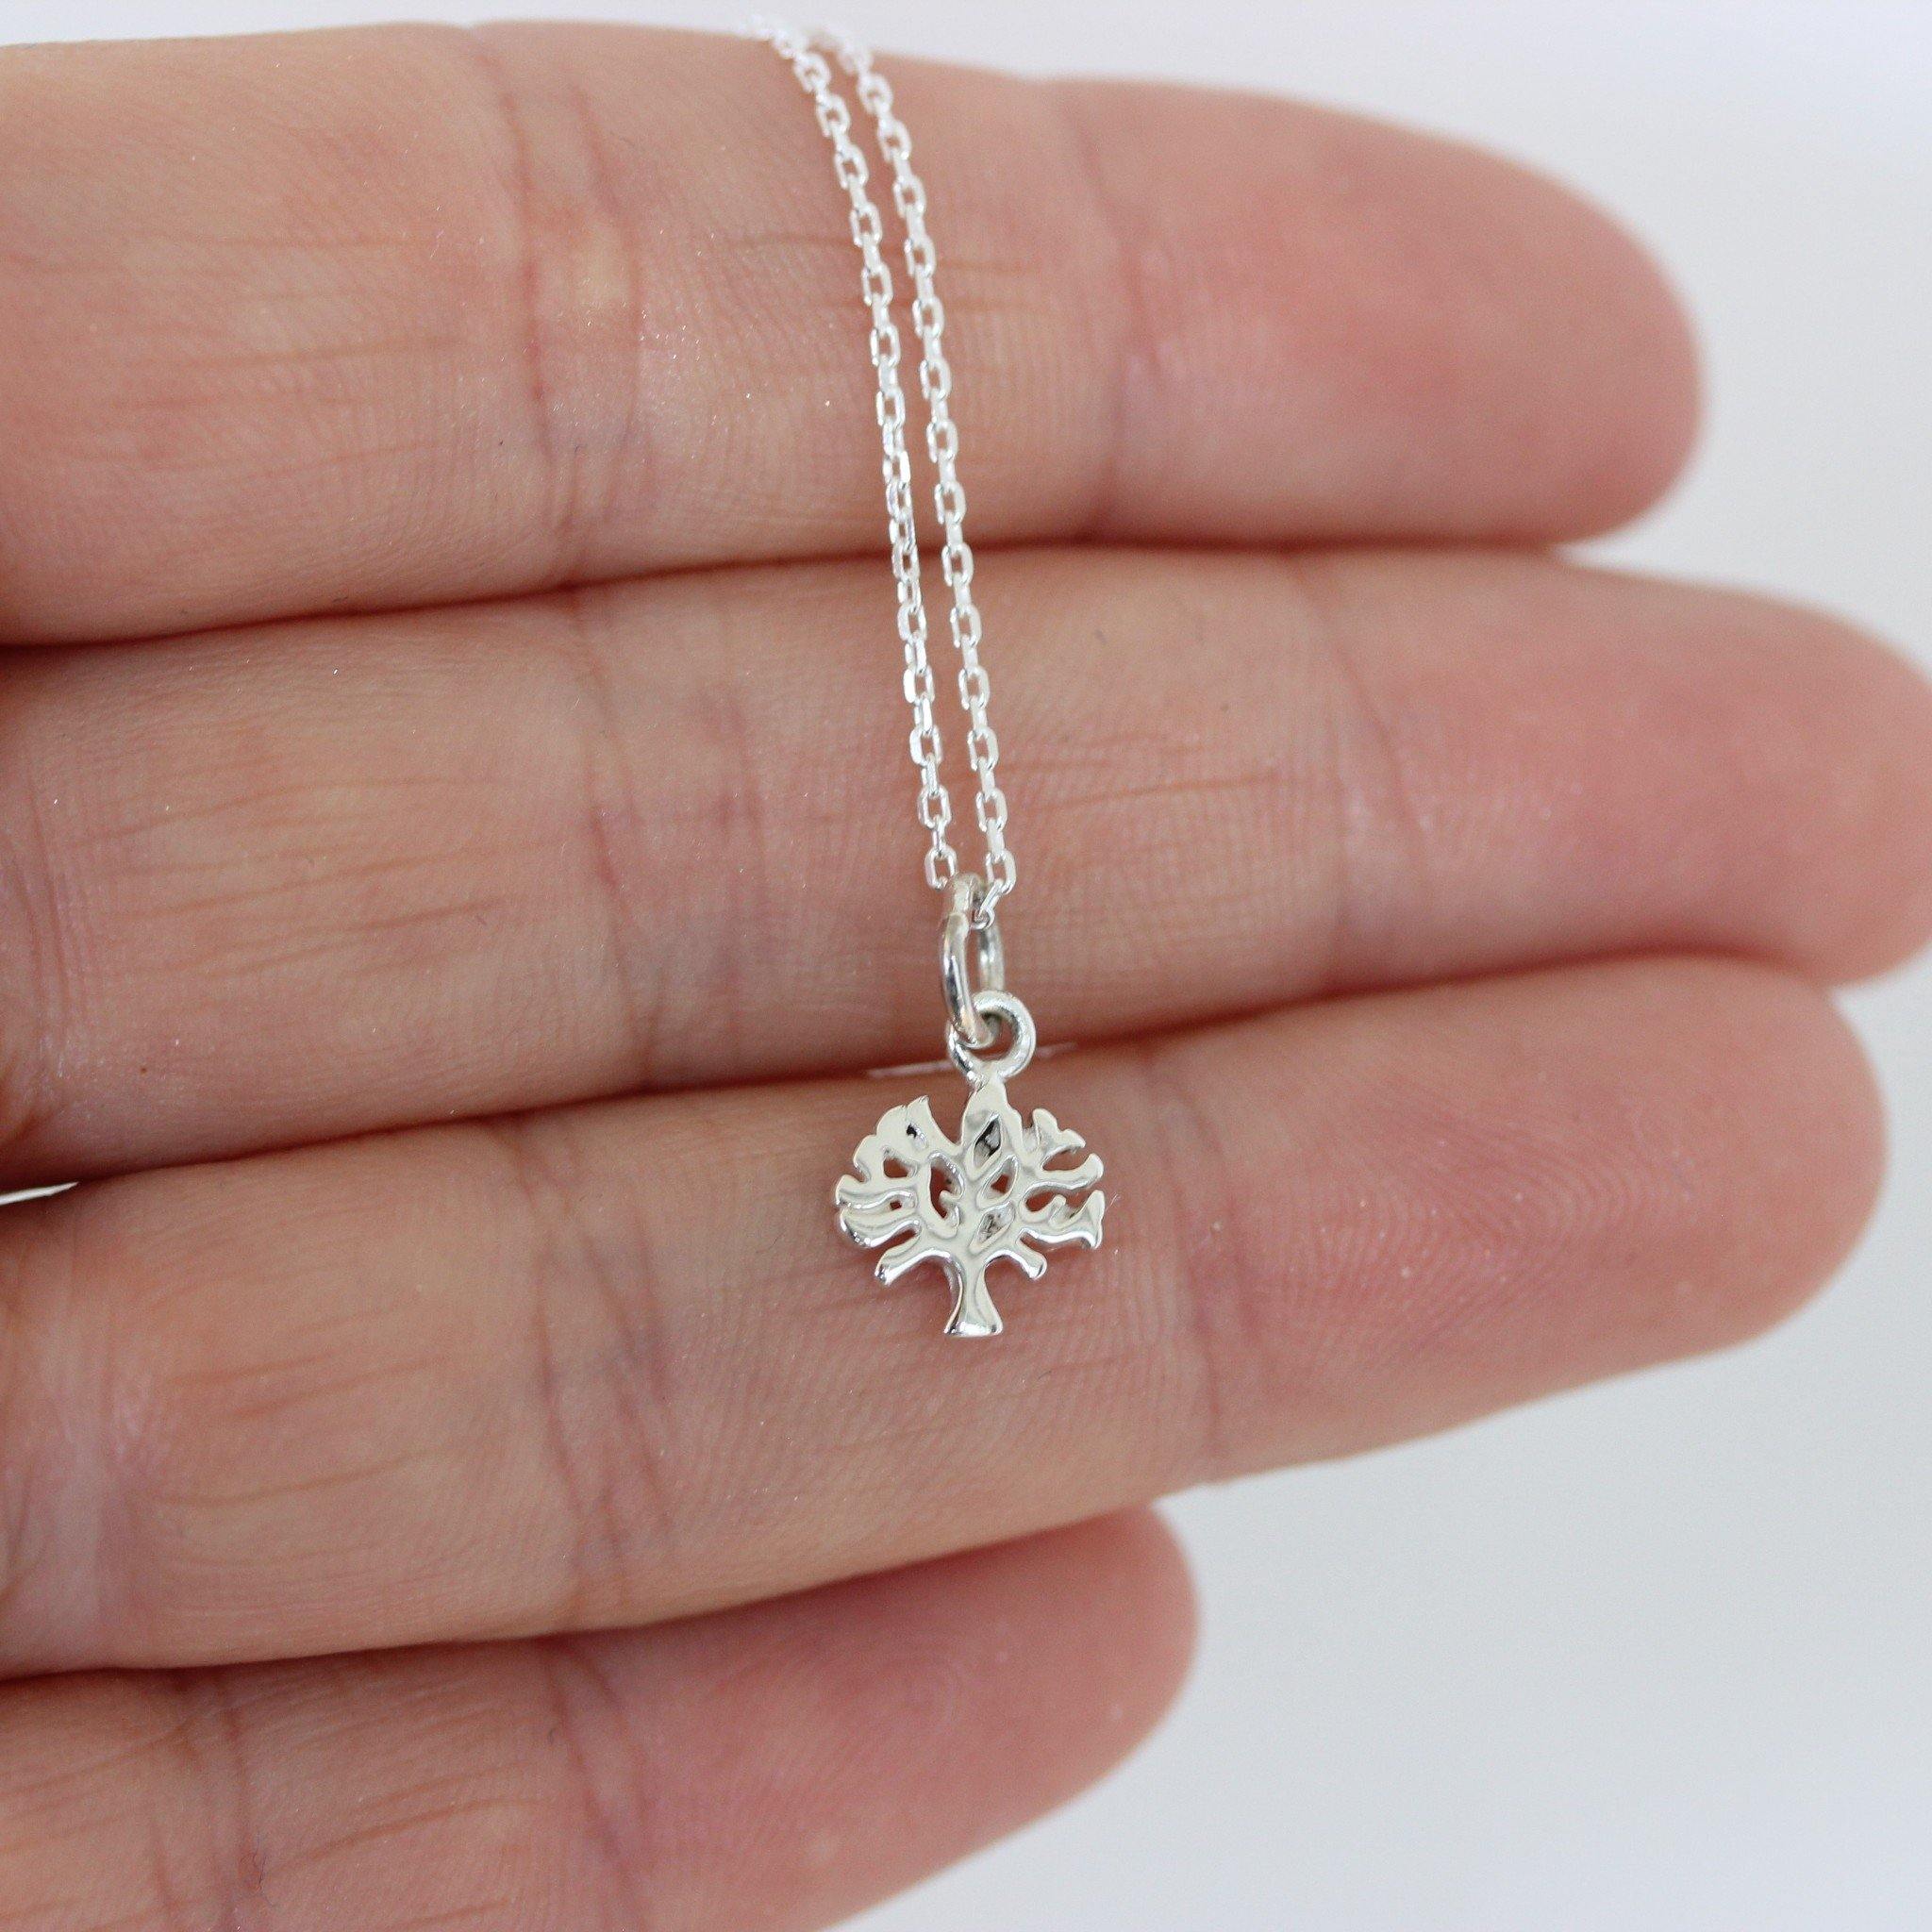 Genuine Sterling Silver 925 Small Tree of Life Pendant & 45cm Italian Necklace - STERLING SILVER DESIGNS